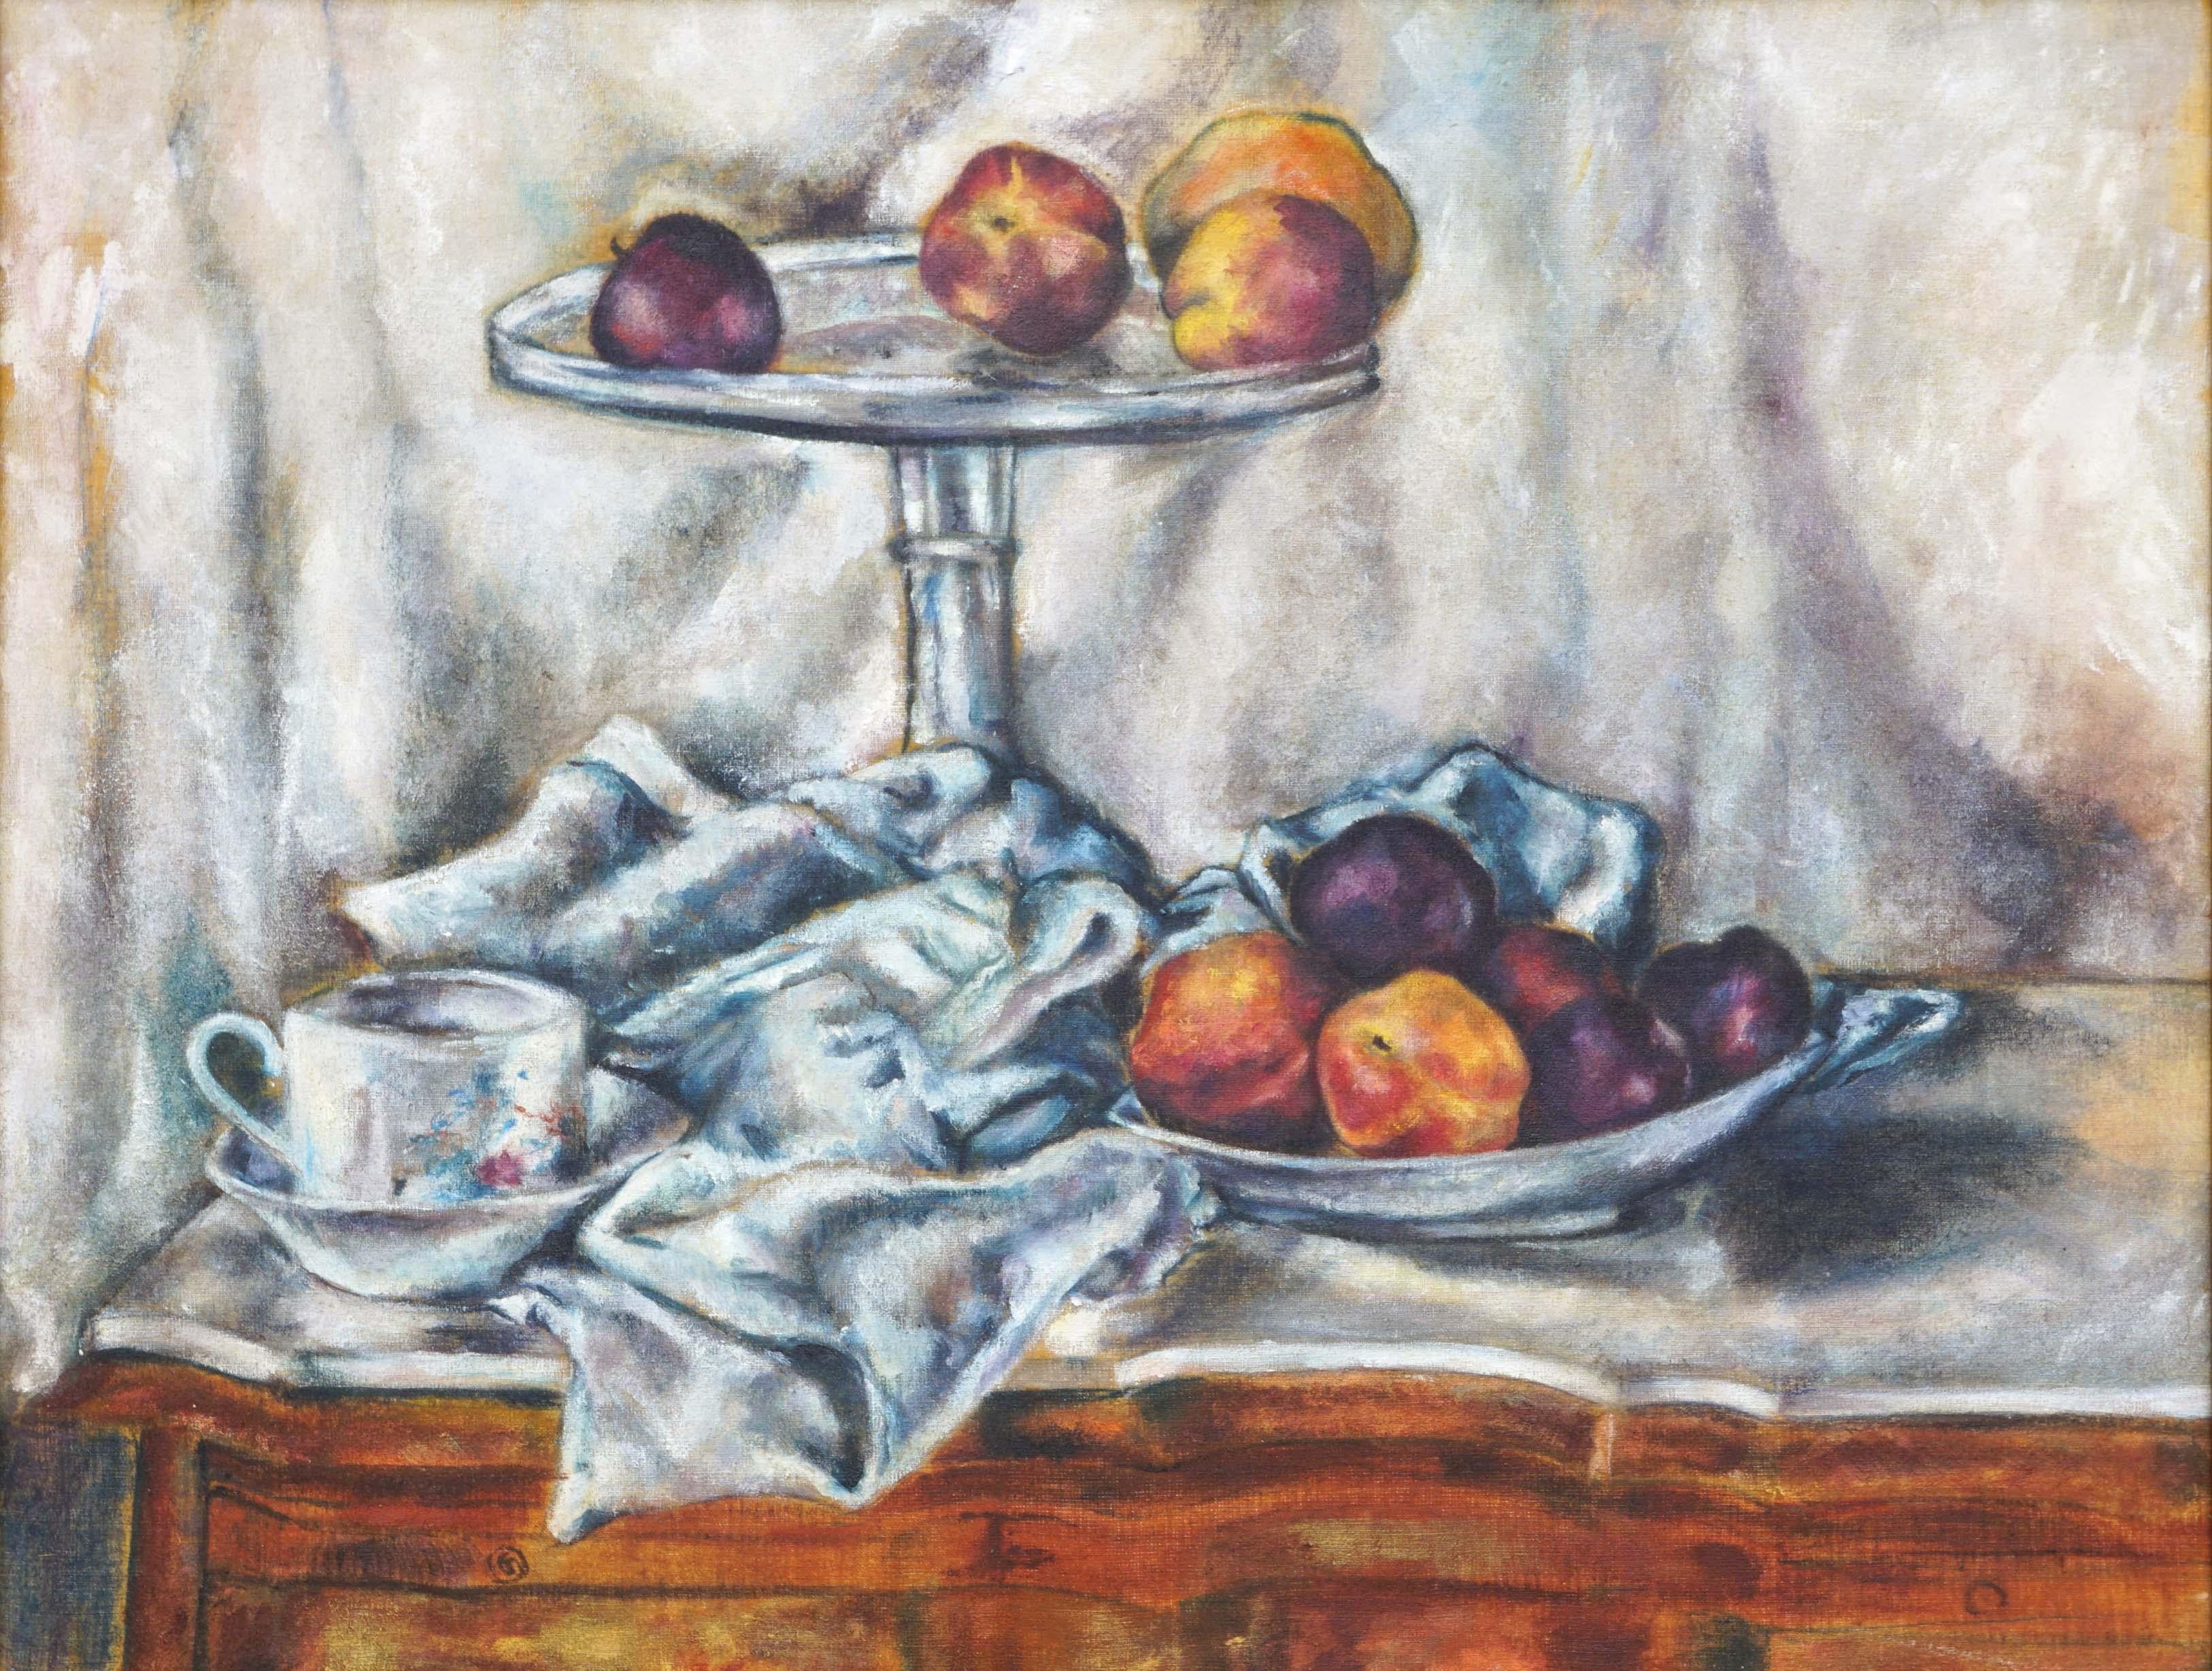 Peaches and Plums Still Life in Style of Paul Cezanne - Painting by Unknown